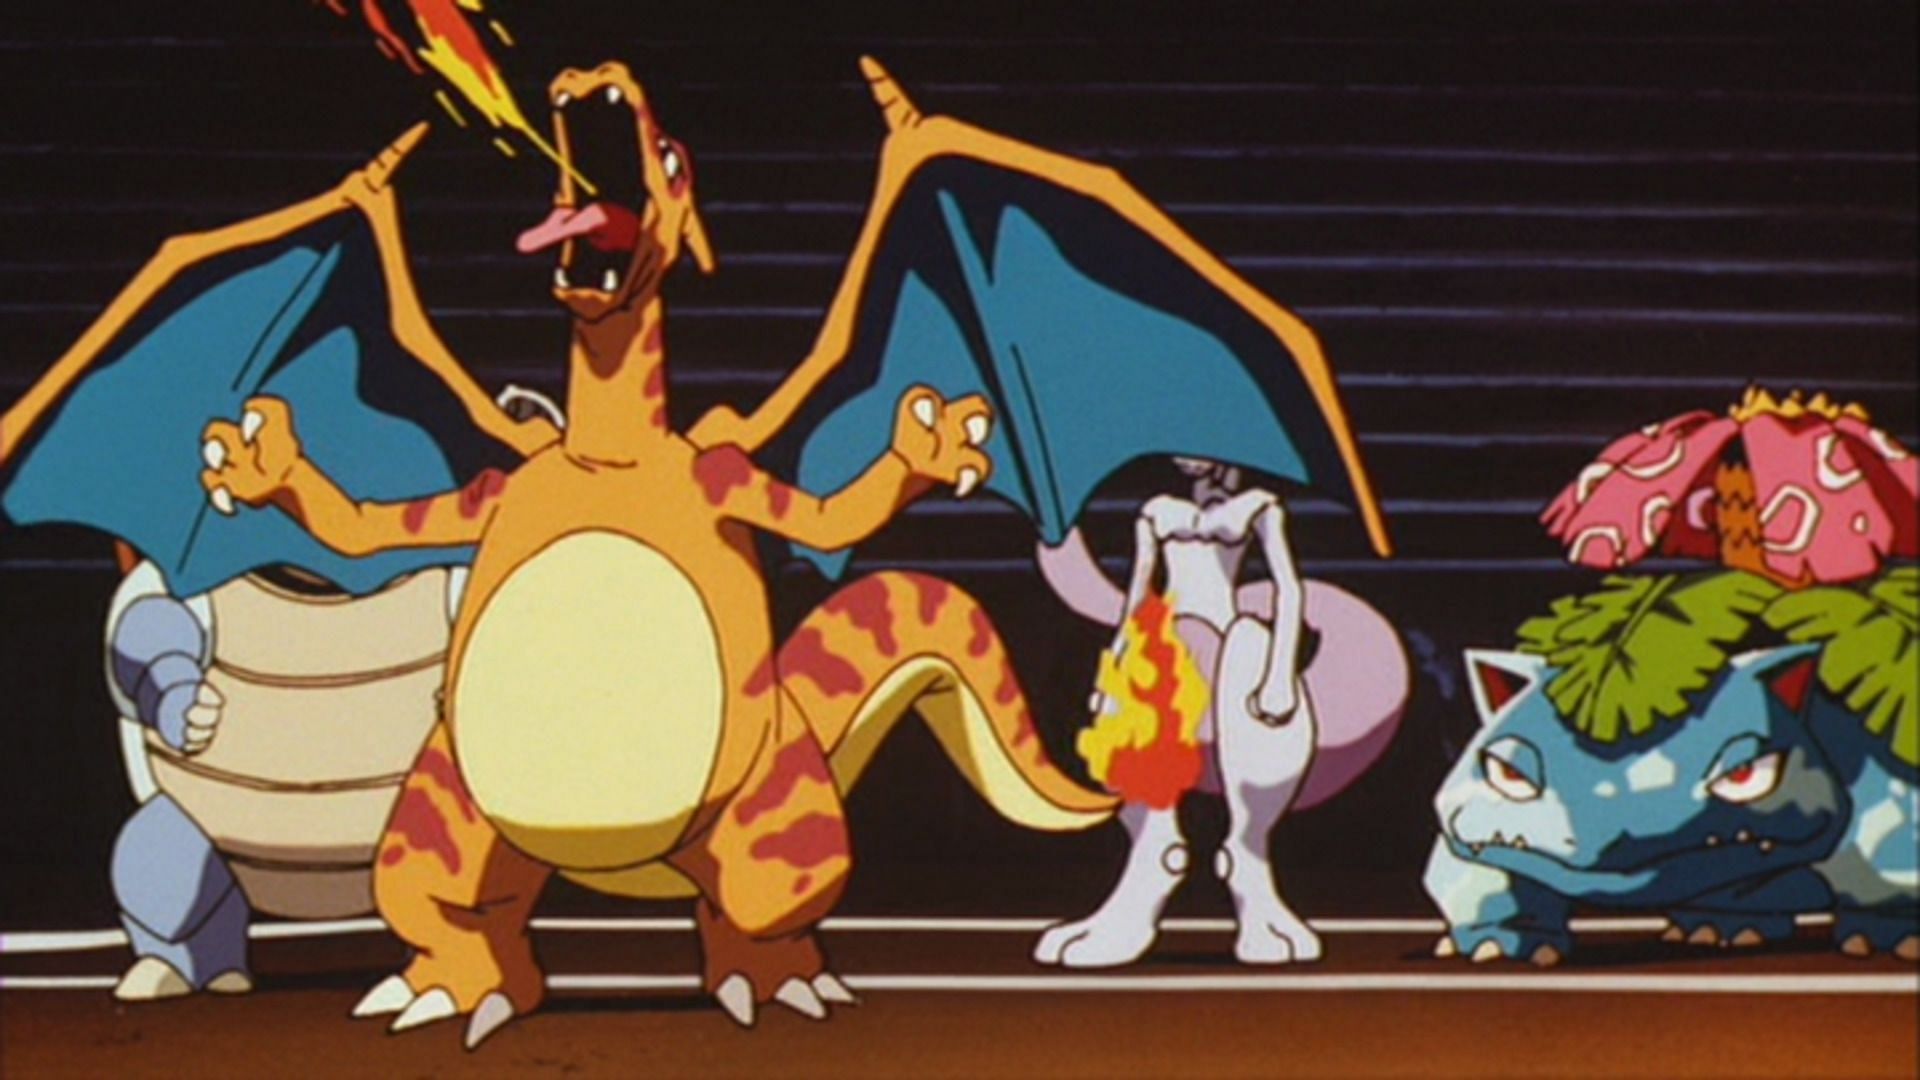 Here is what players should know about Cloned Charizard in Pokemon GO (Image via The Pokemon Company)